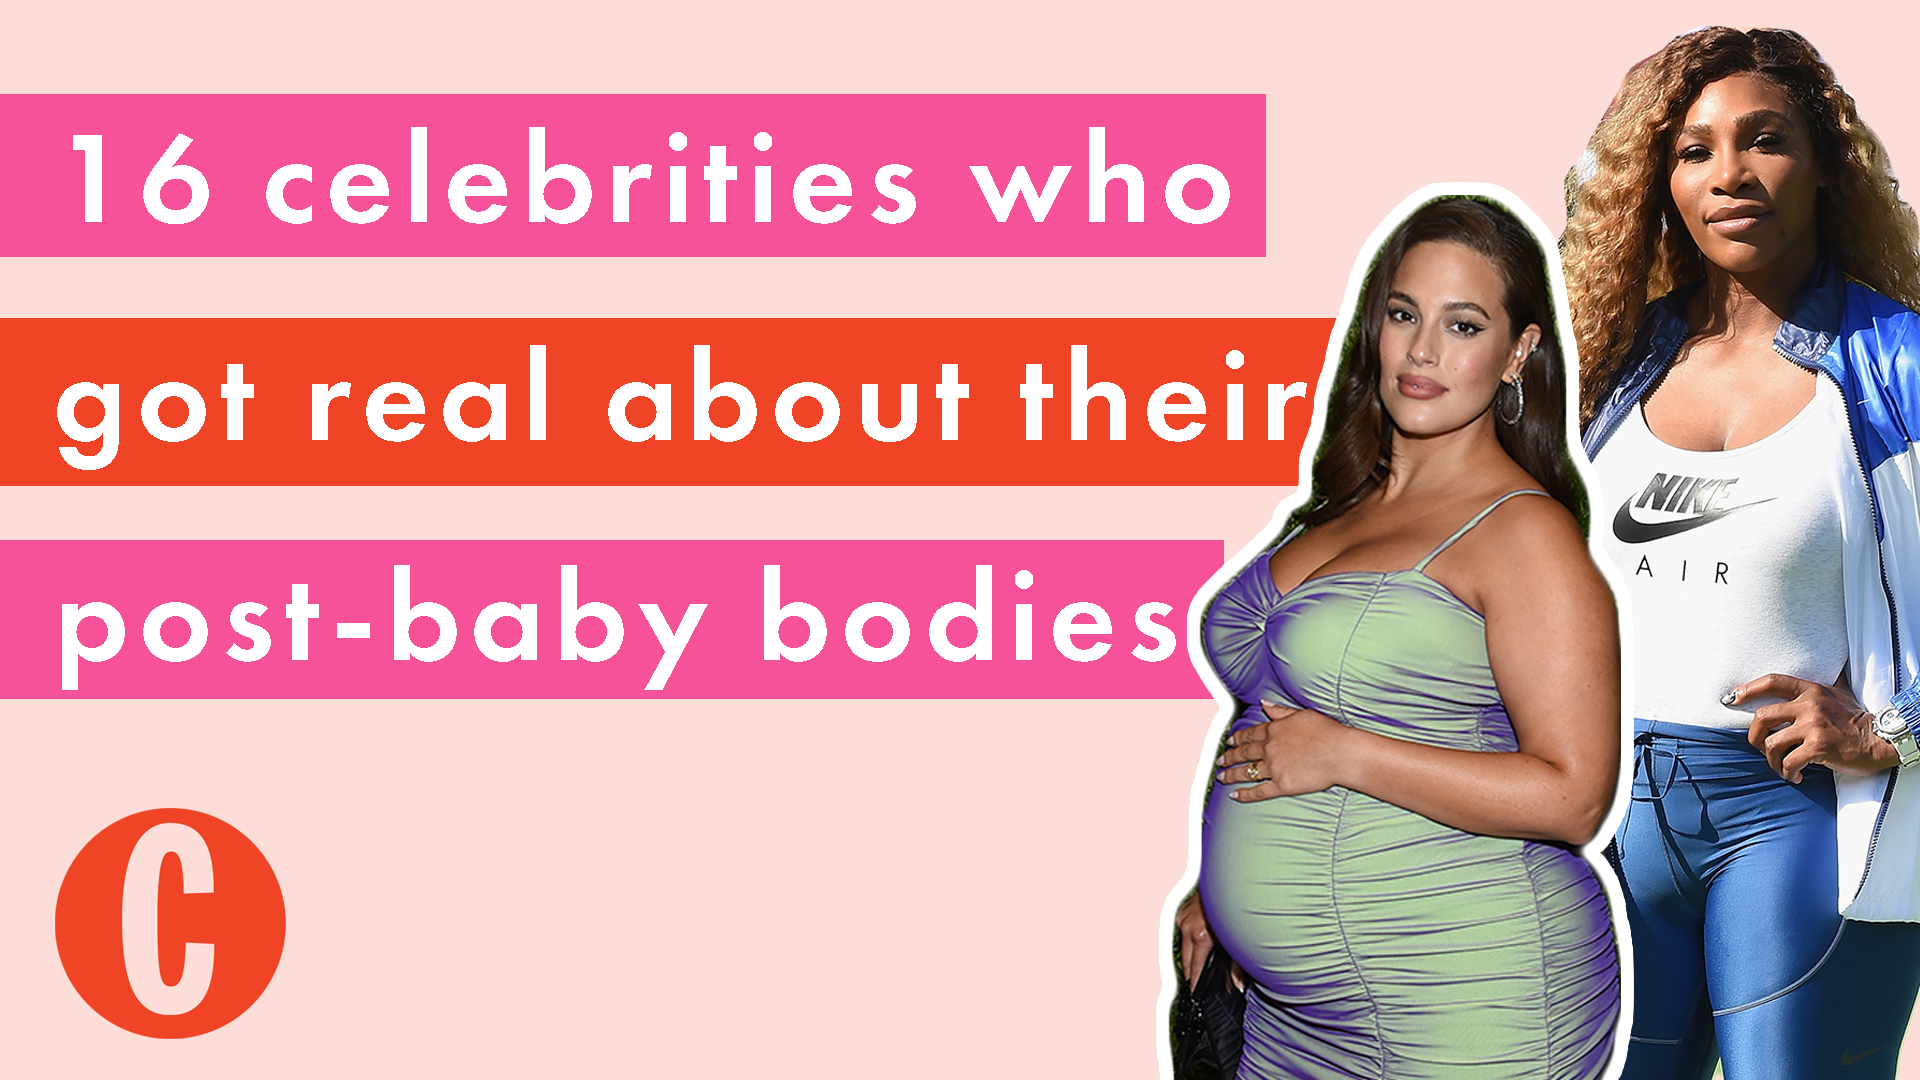 20 celebrities who got real about their post-baby bodies